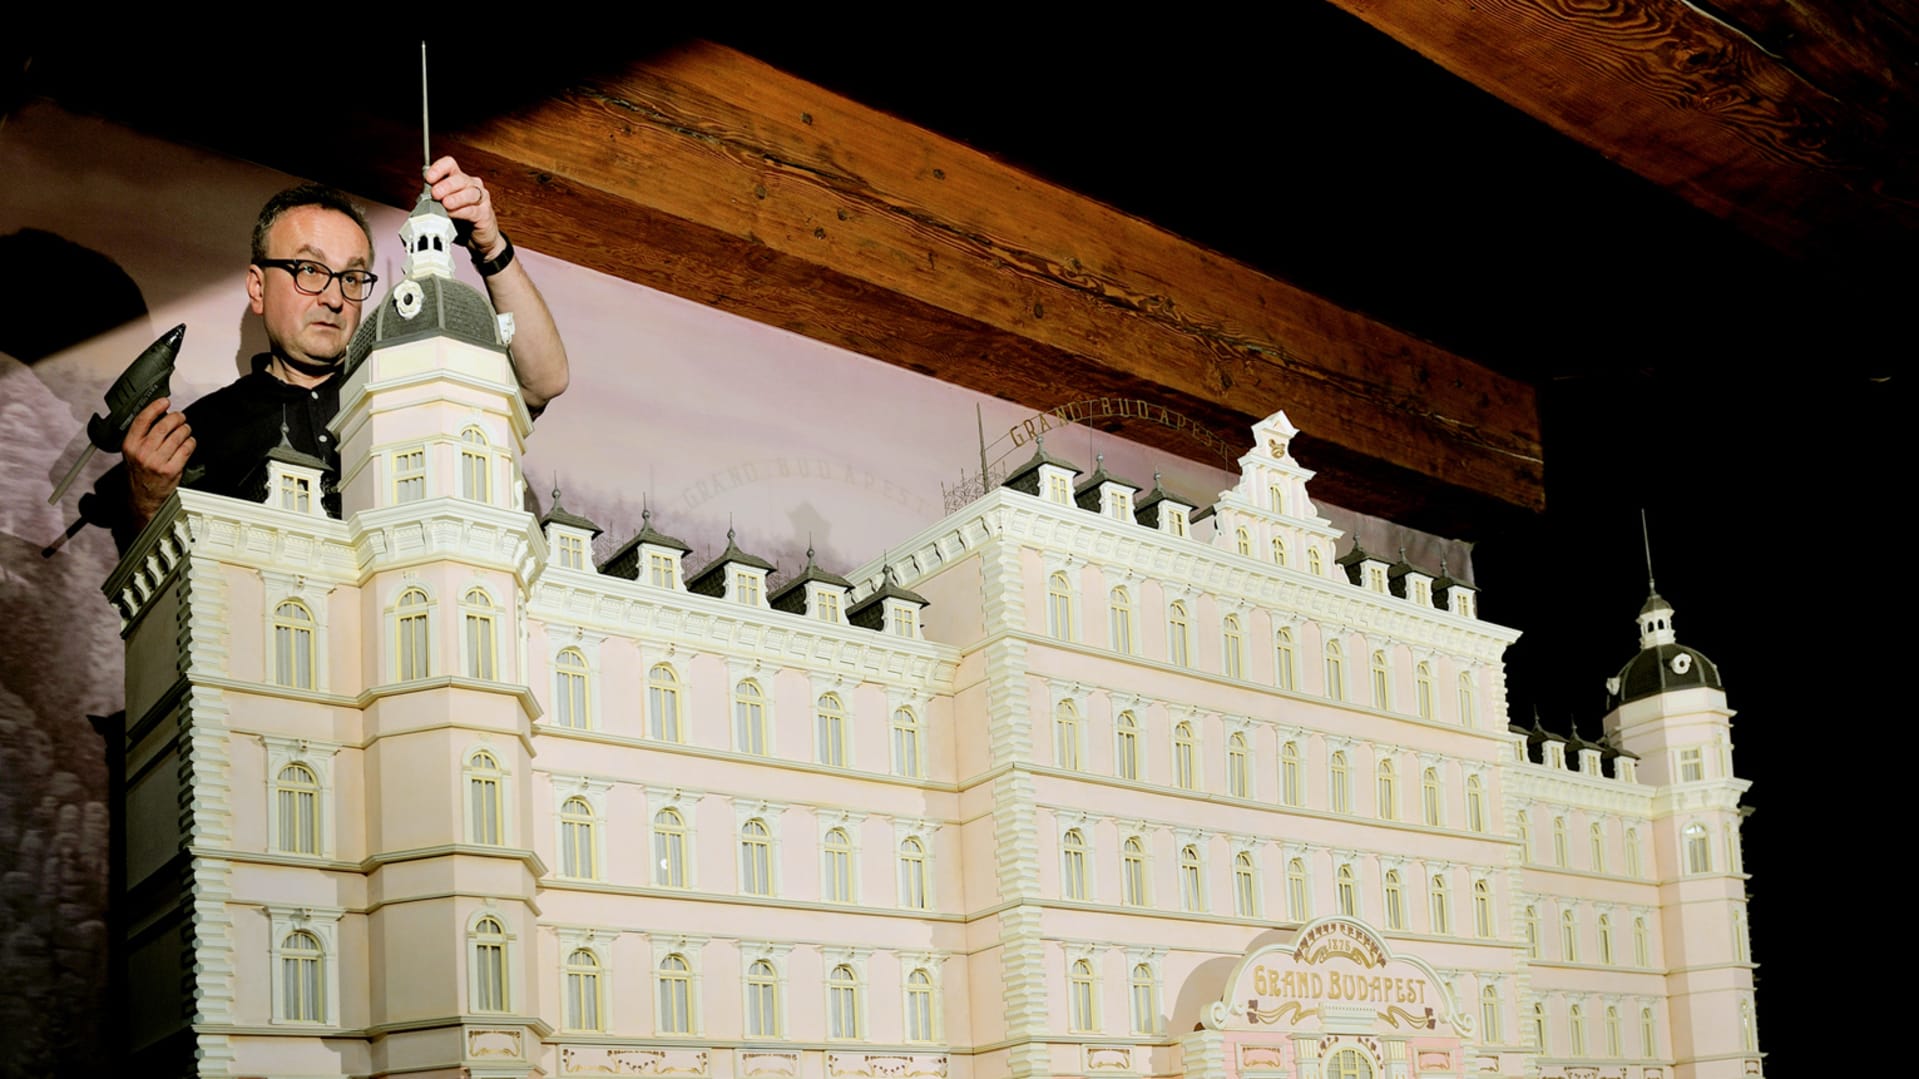 The real star of Wes Anderson’s films? The model maker who meticulously crafts the signs and buildings